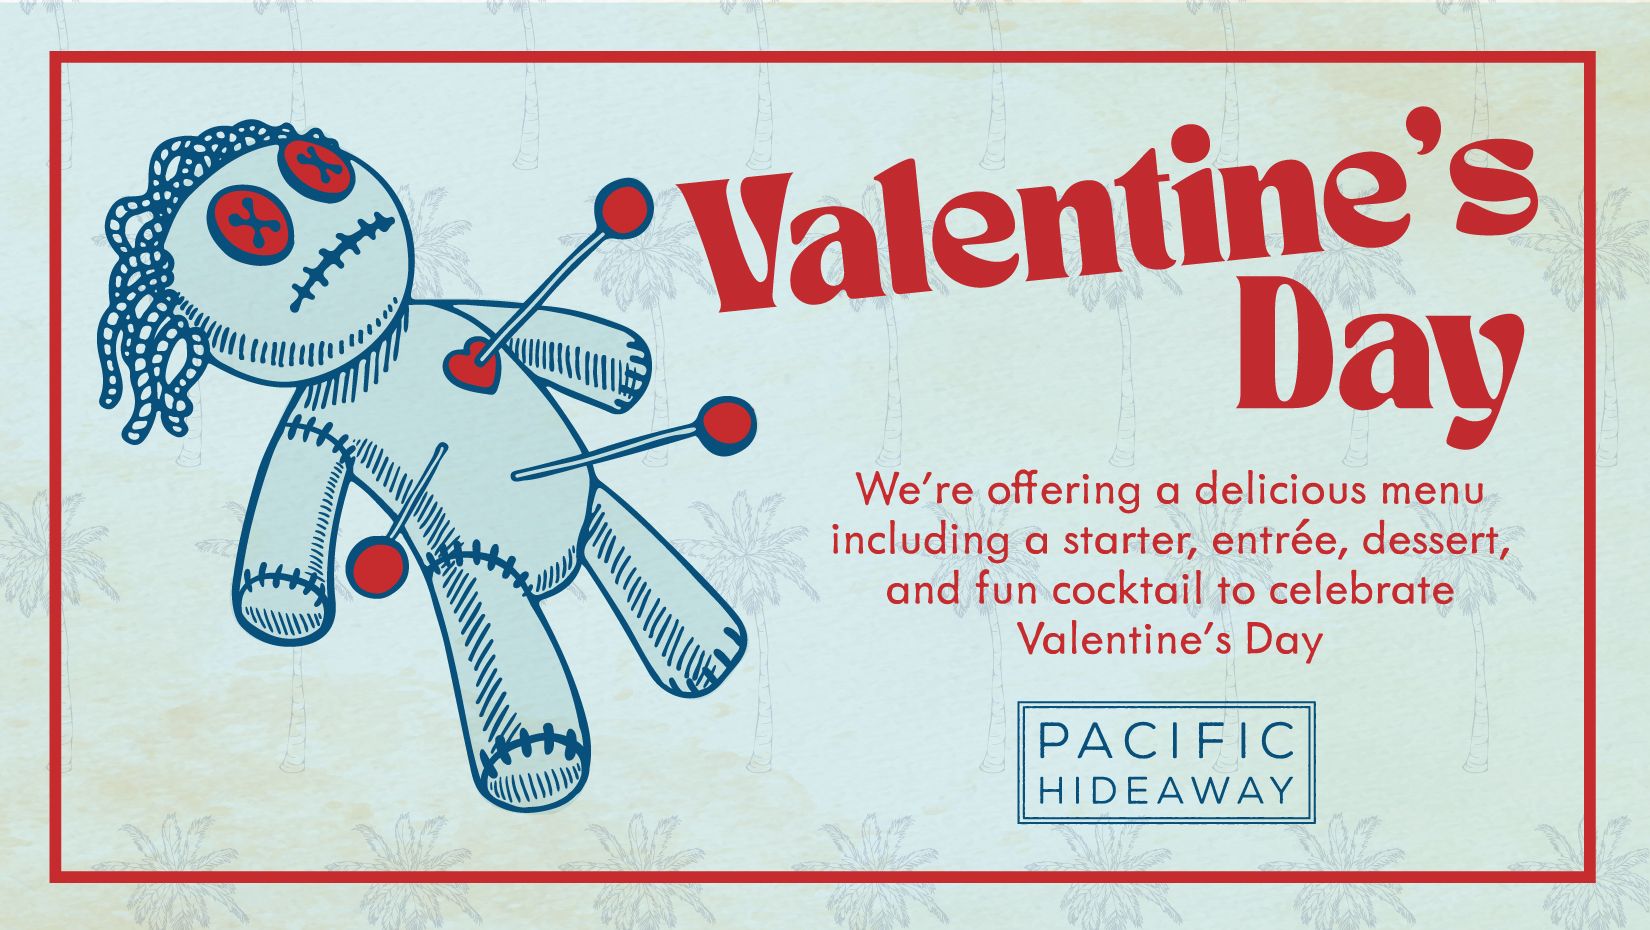 Pacific hideaway valentines day